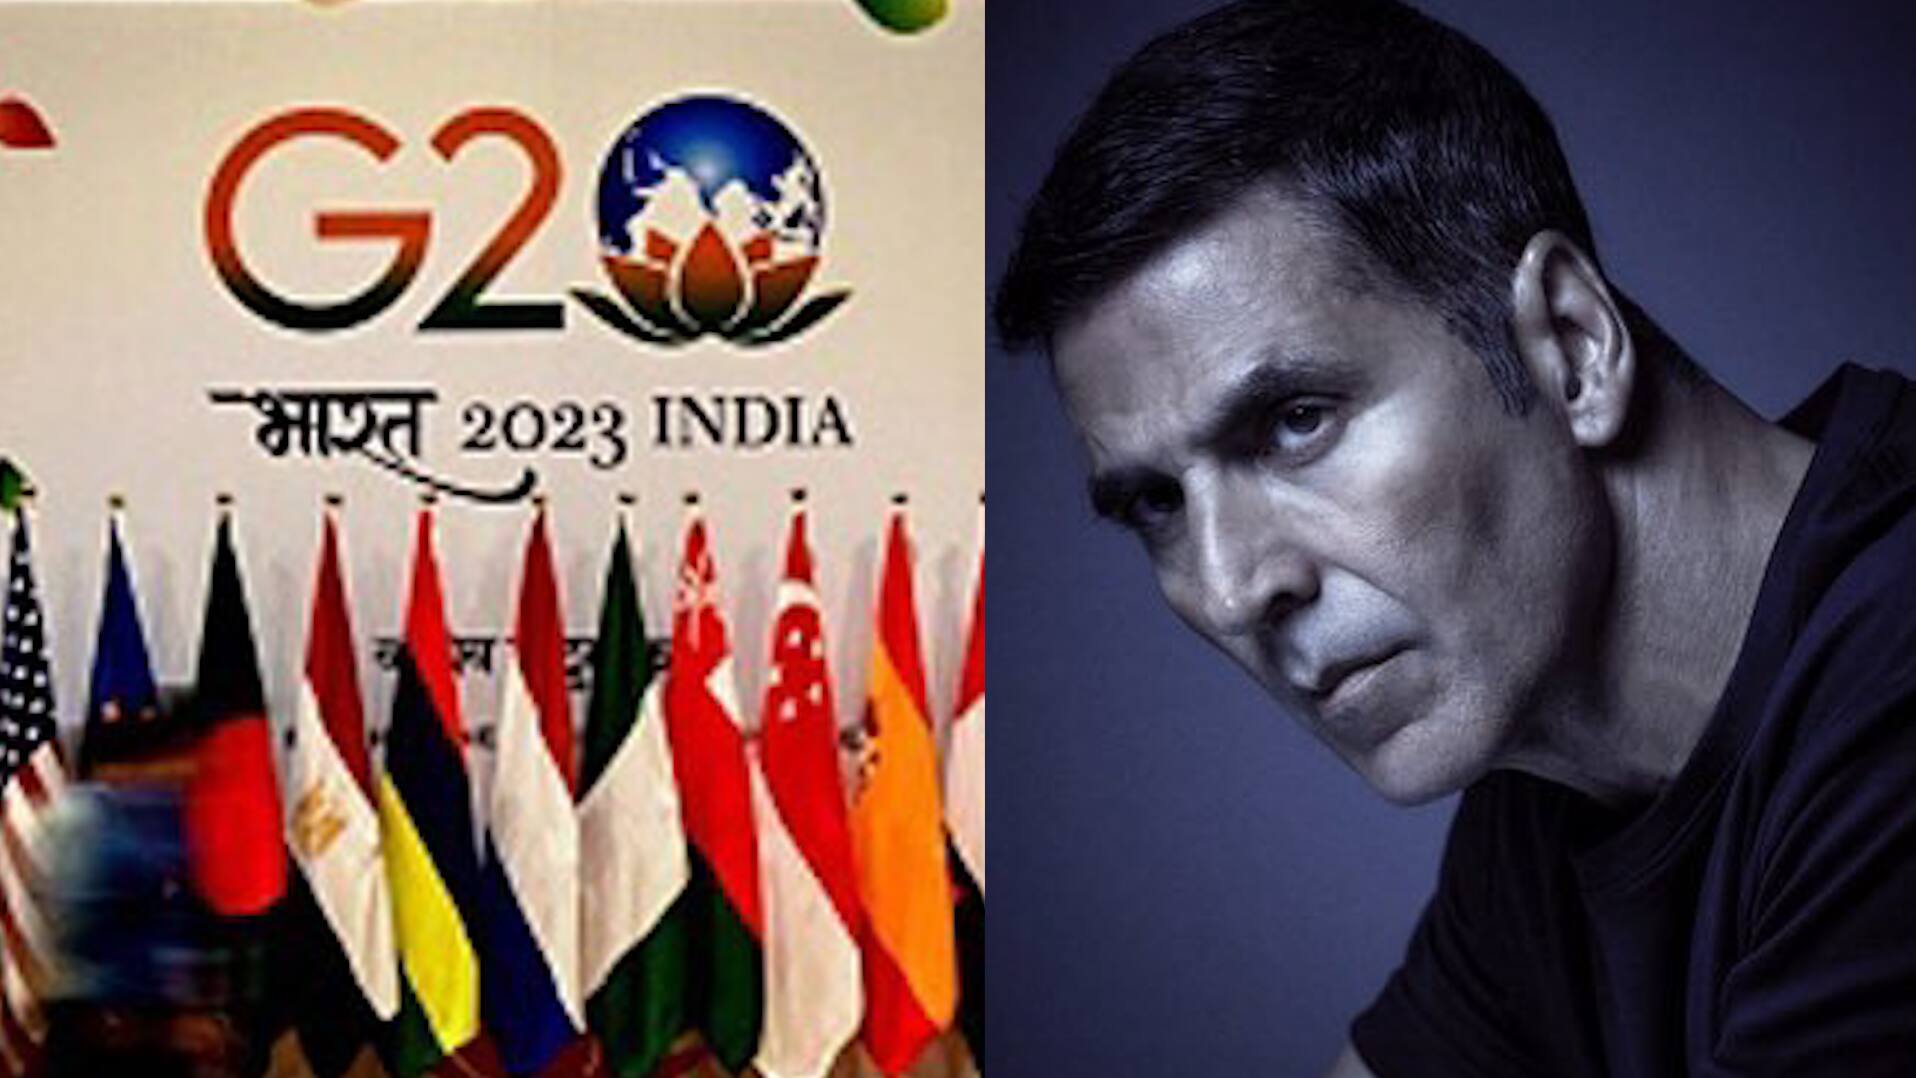 Akshay Kumar thanked PM Modi for the success of the G20 summit 